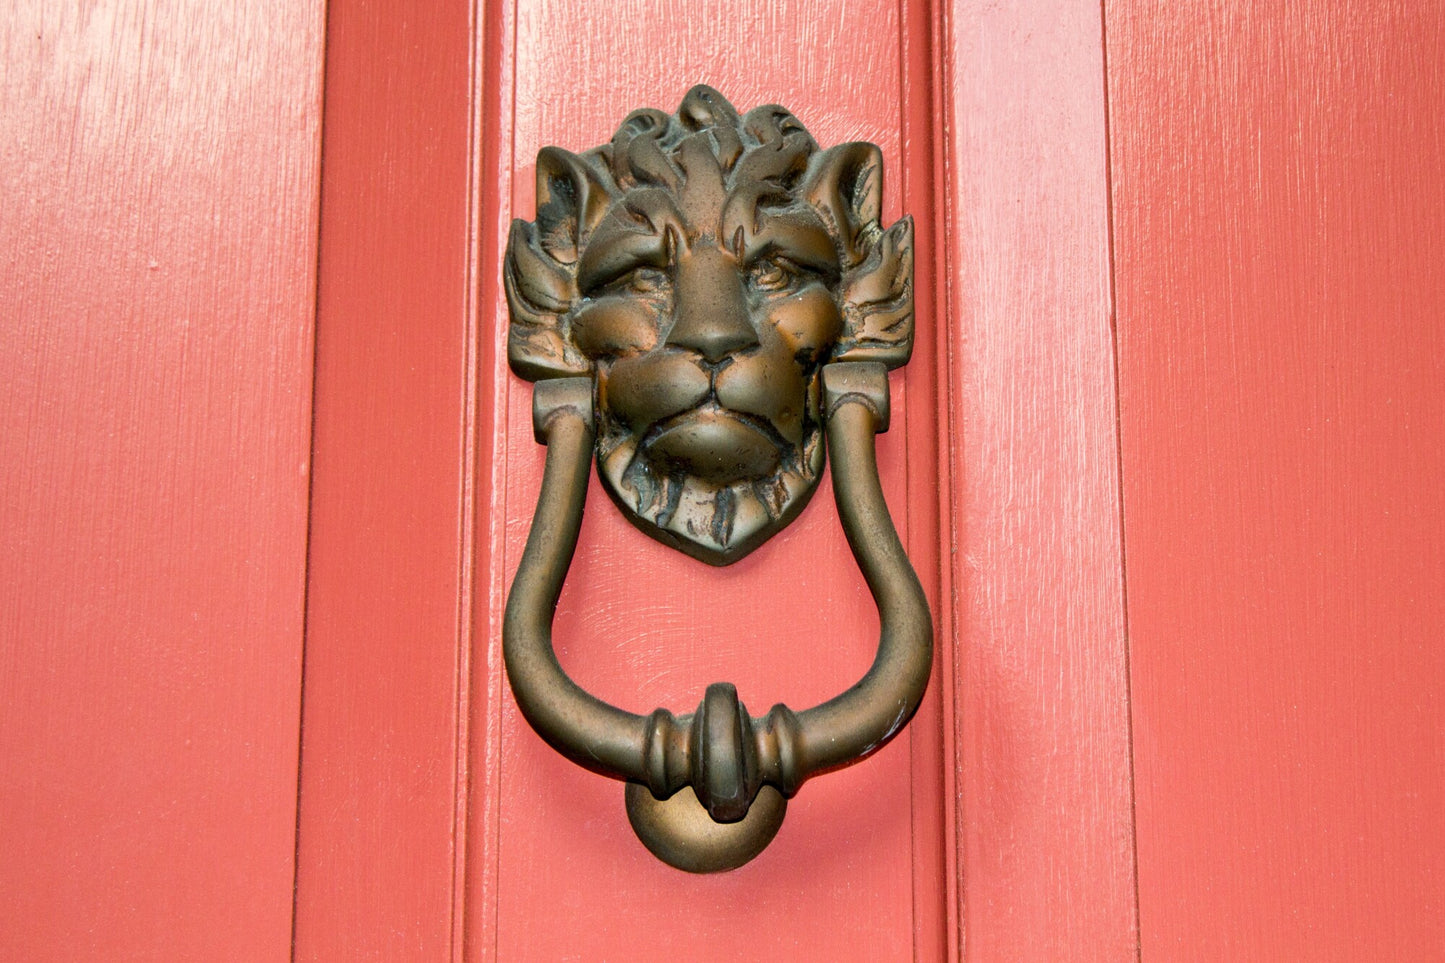 A Home Owner's Guide to the Different Types of Door Knockers – Old